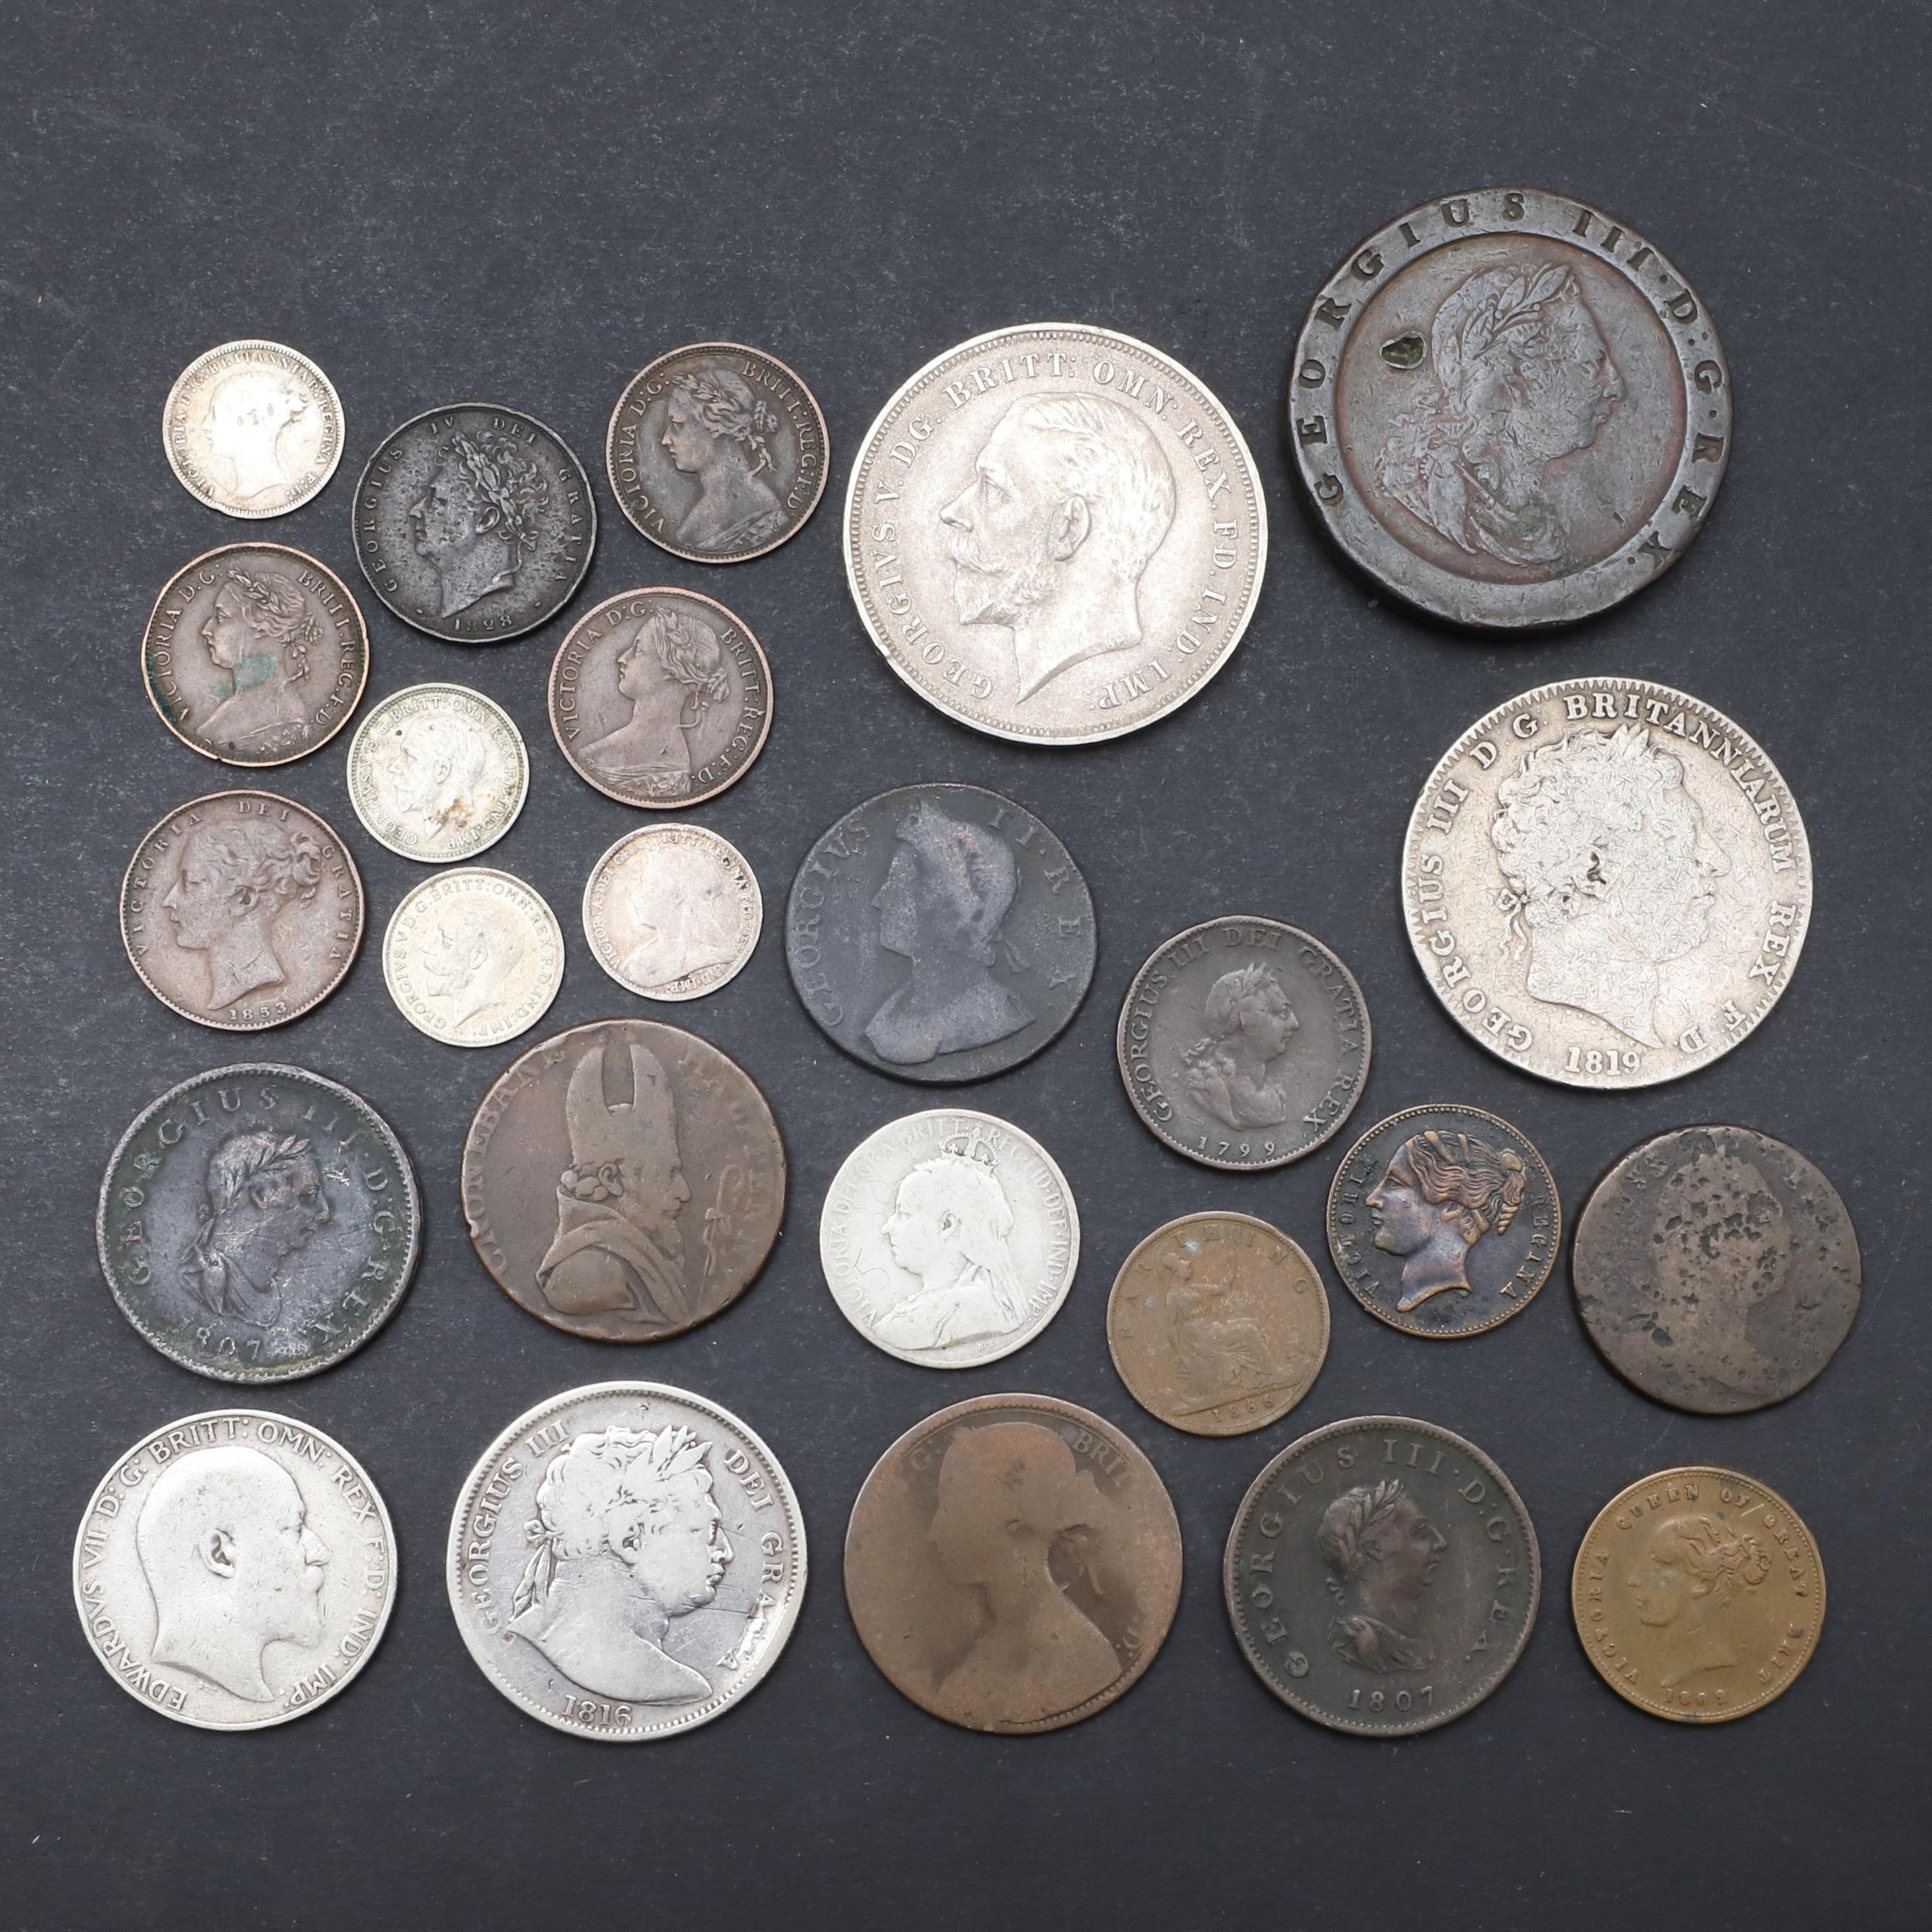 A MIXED COLLECTION OF BRITISH COINS TO INCLUDE 1819 CROWN AND 1797 TWOPENCE.